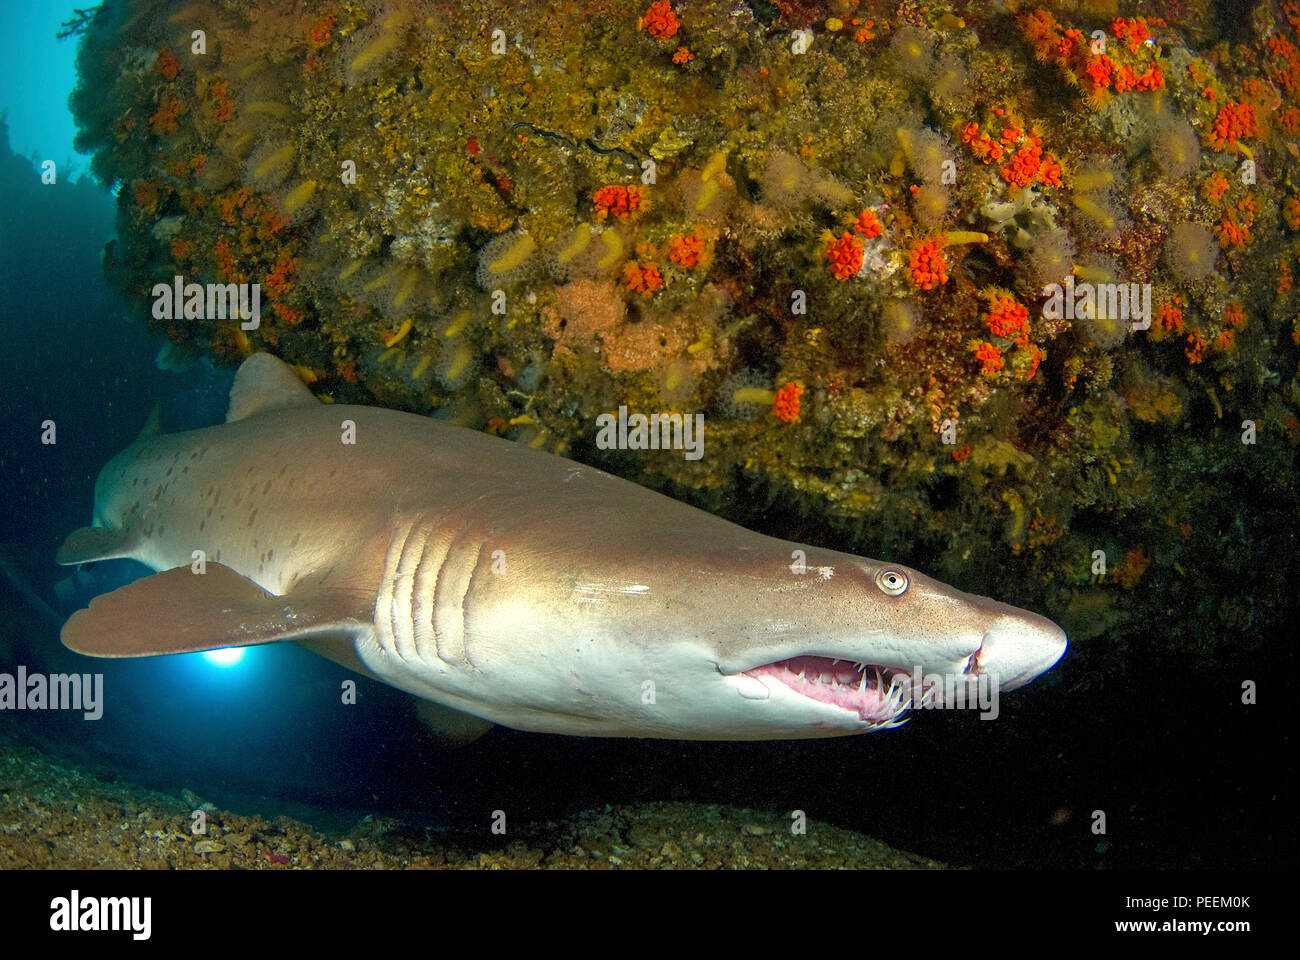 Ragged tooth shark (Carcharias taurus synonym Eugomphodus taurus), Carcharias taurus), Aliwal Shoals, South Africa Stock Photo